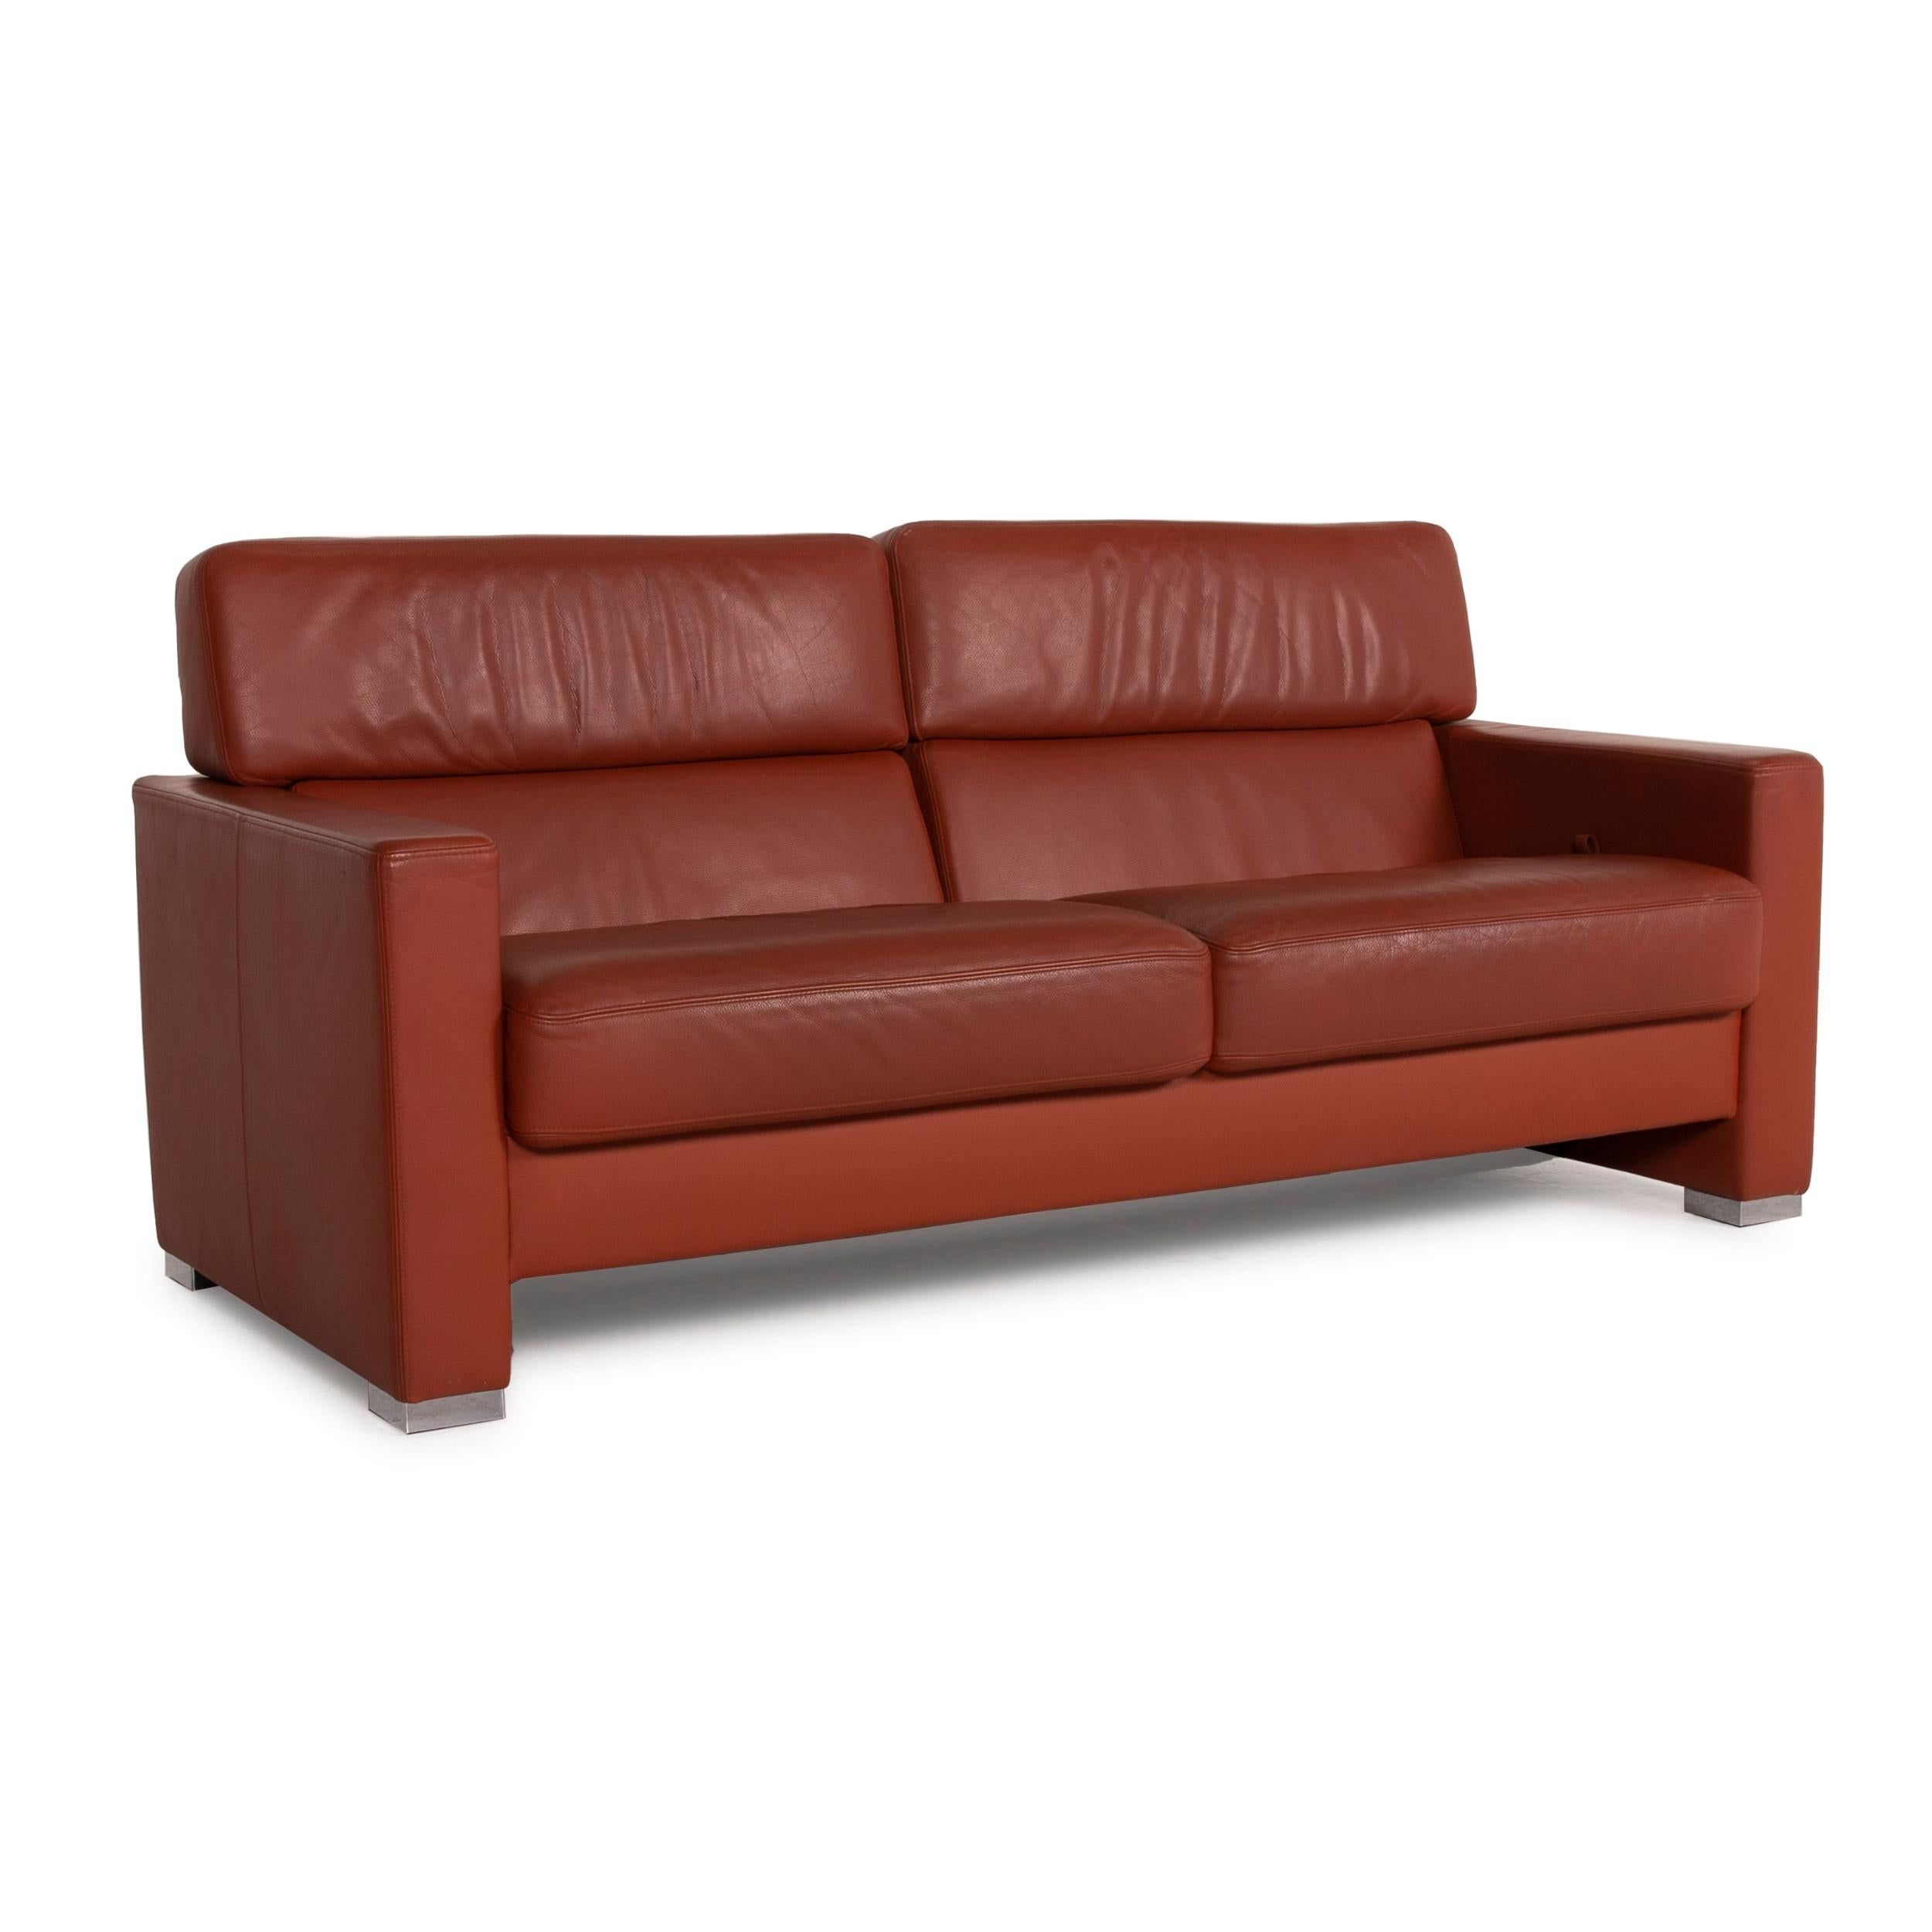 Brühl Collection Separe Leather Sofa Terracotta Three-Seater Function For Sale 2